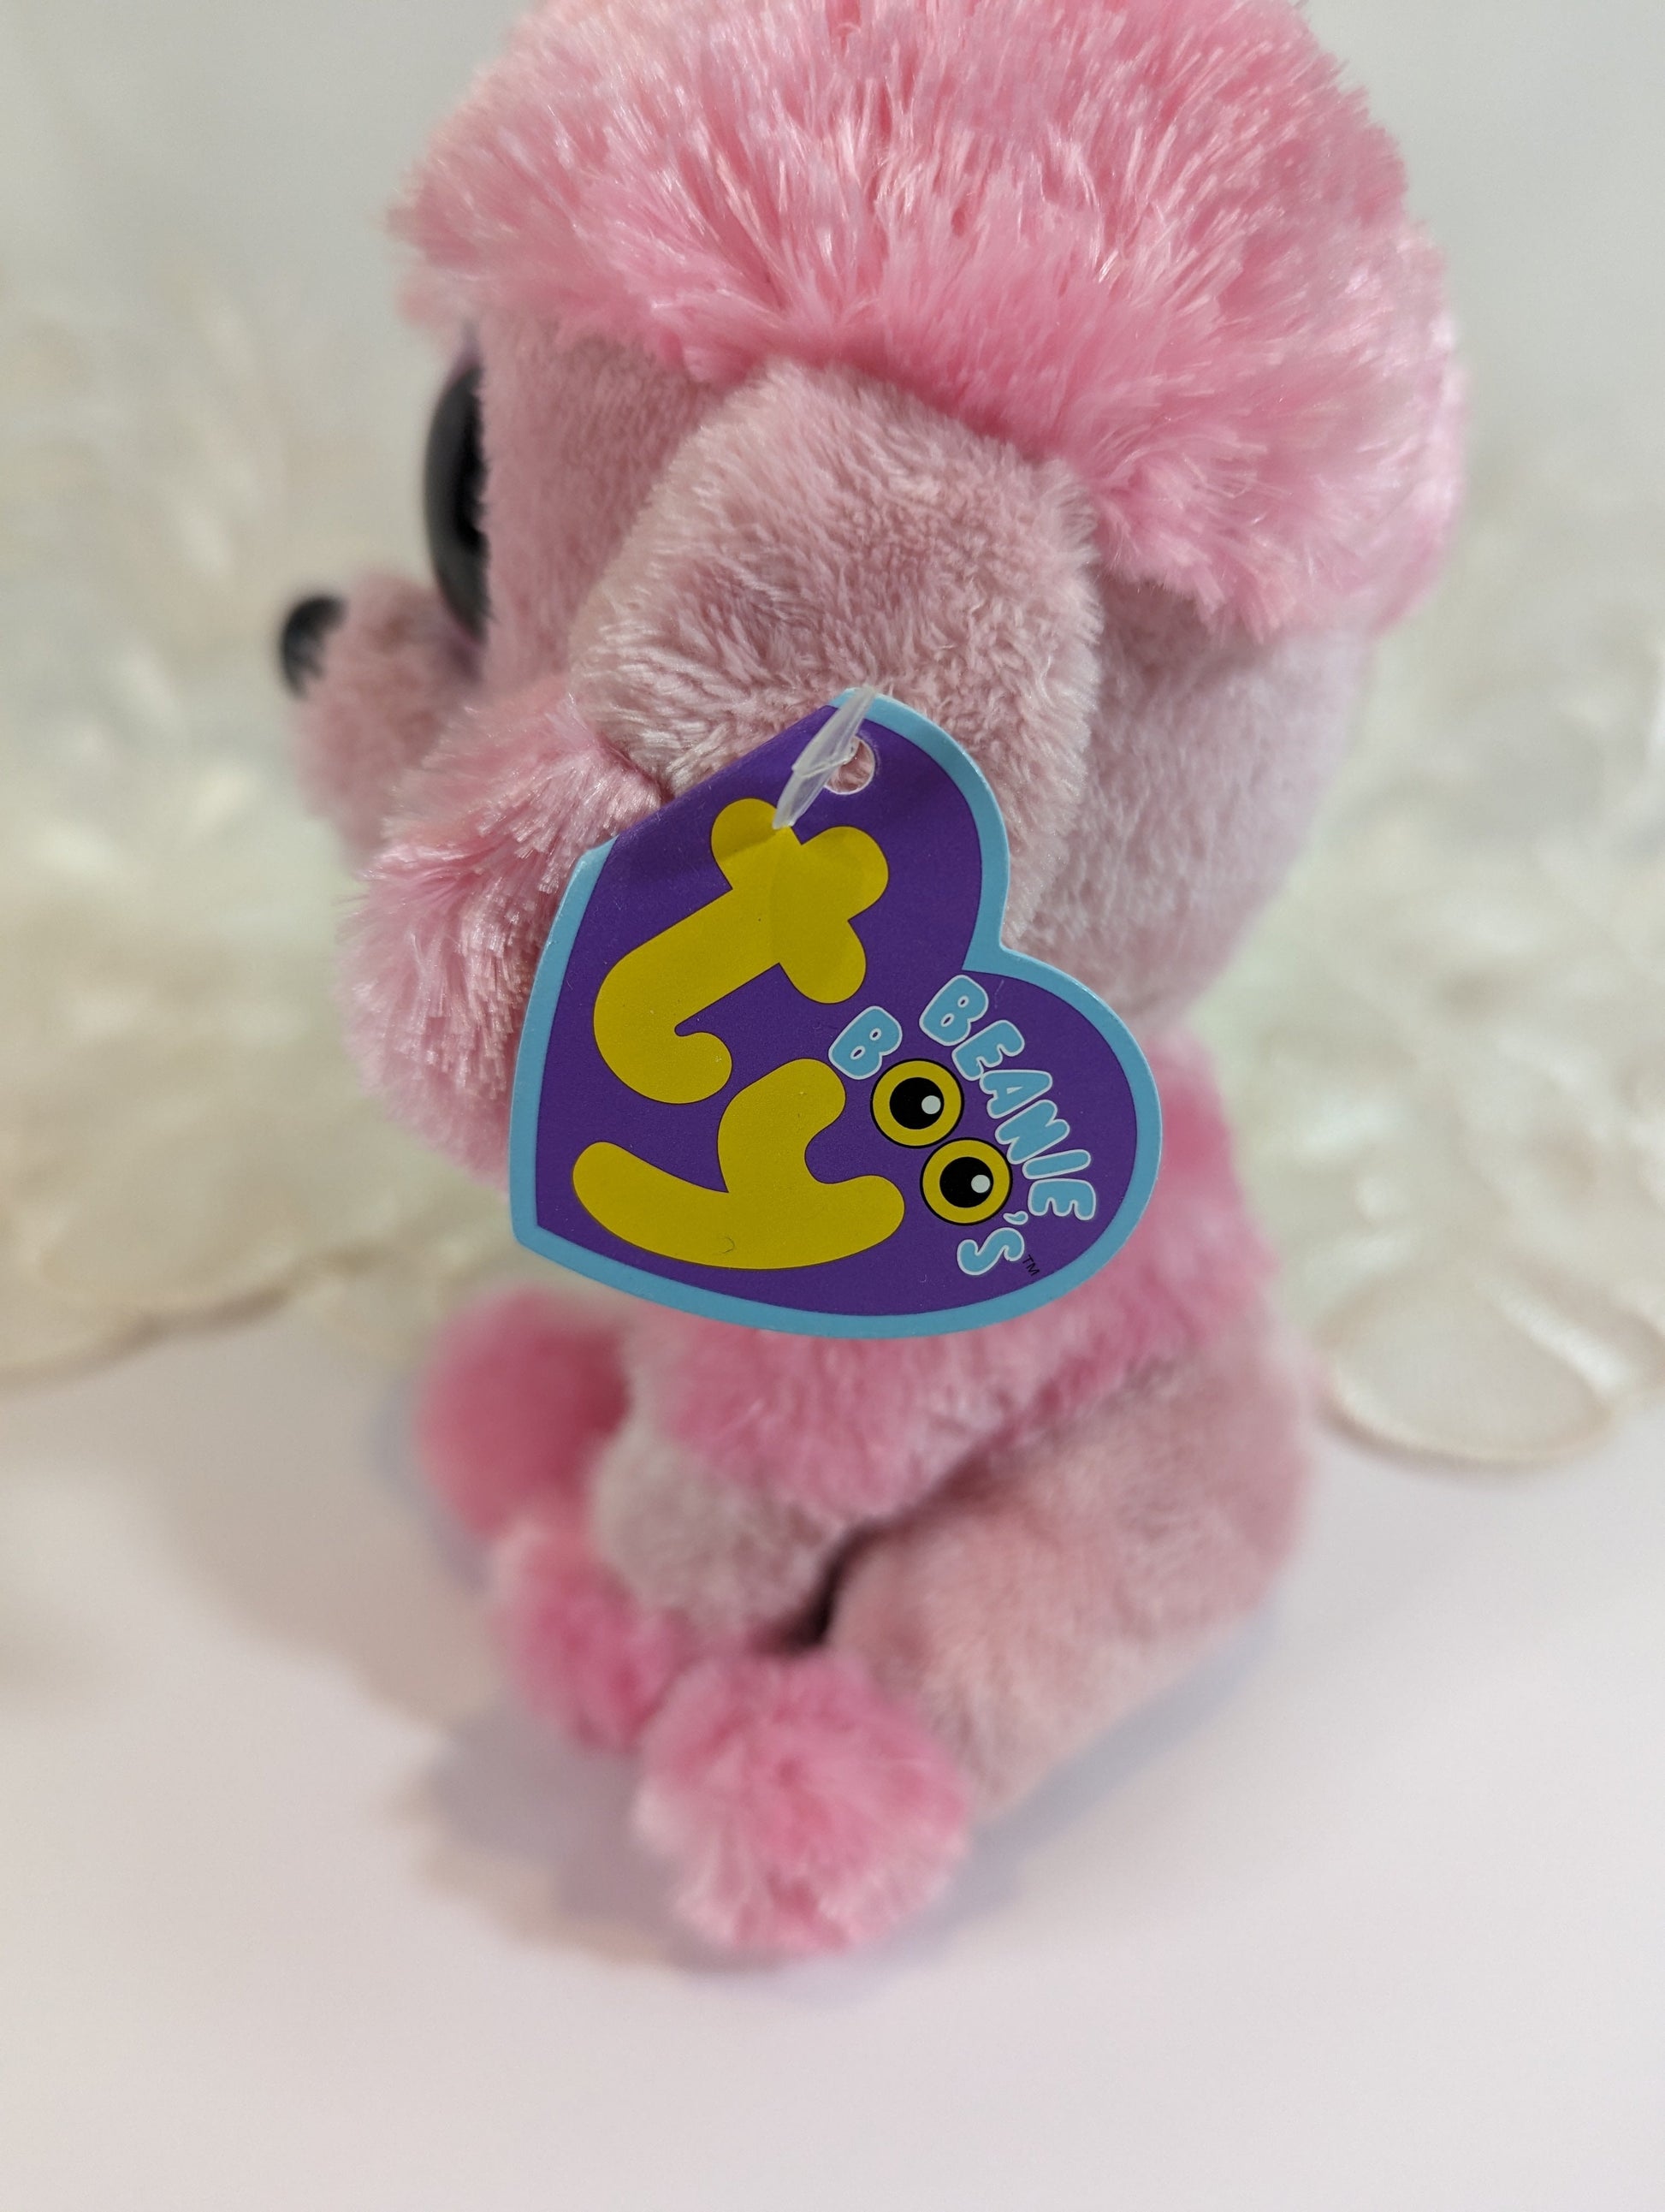 Ty Beanie Boo - Princess The Pink Poodle Dog (6in) *Rare* First Gen Purple Tag - Vintage Beanies Canada